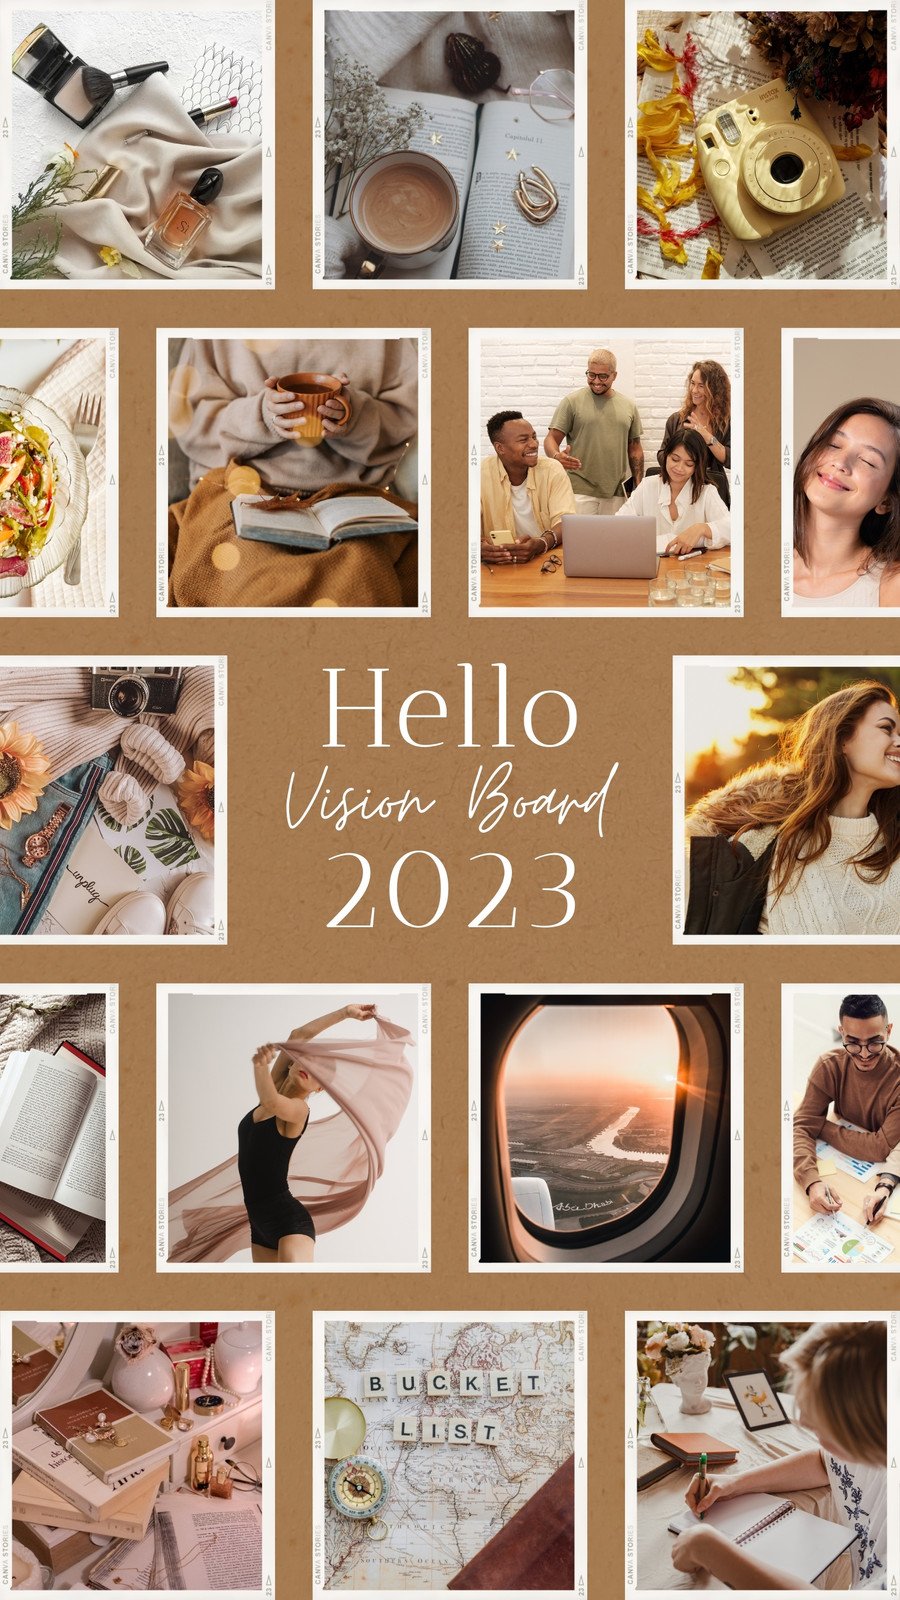 My 2023 Vision Board & Intentions for the New Year